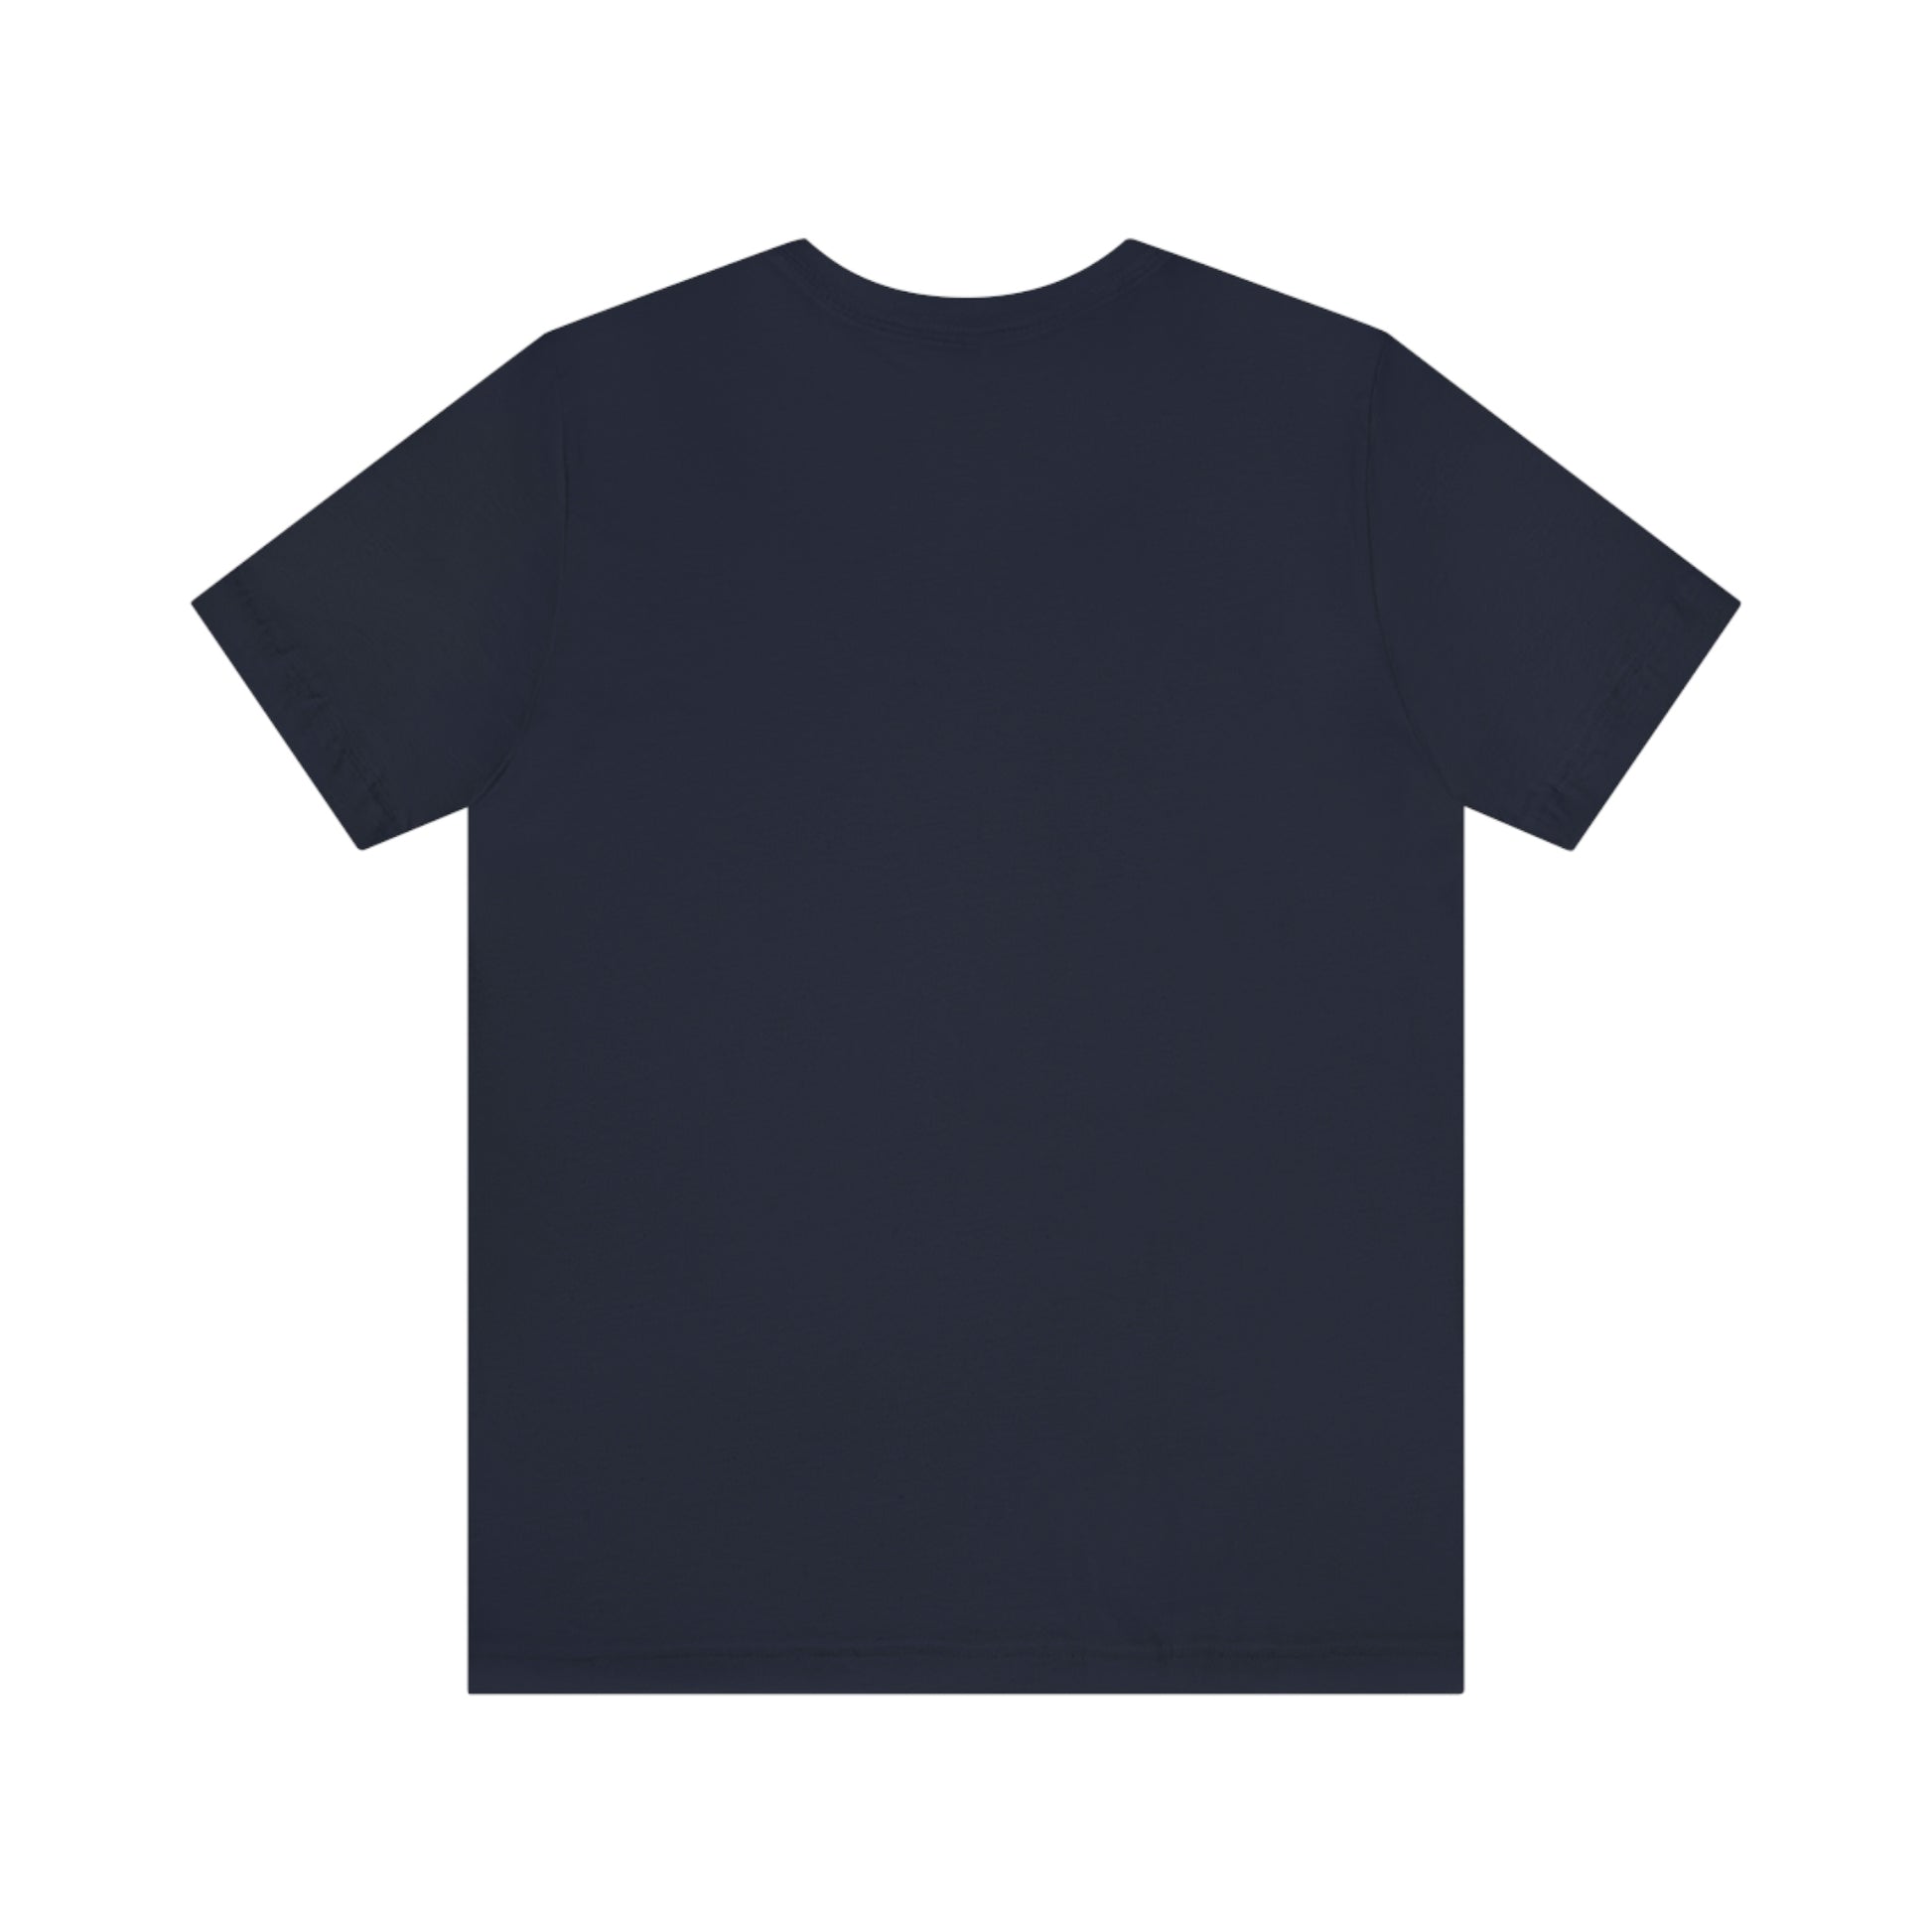 FLYING BOOMERANG  - Navy T-Shirt plain back. Taken from the TEQNEON Radioactive collection.